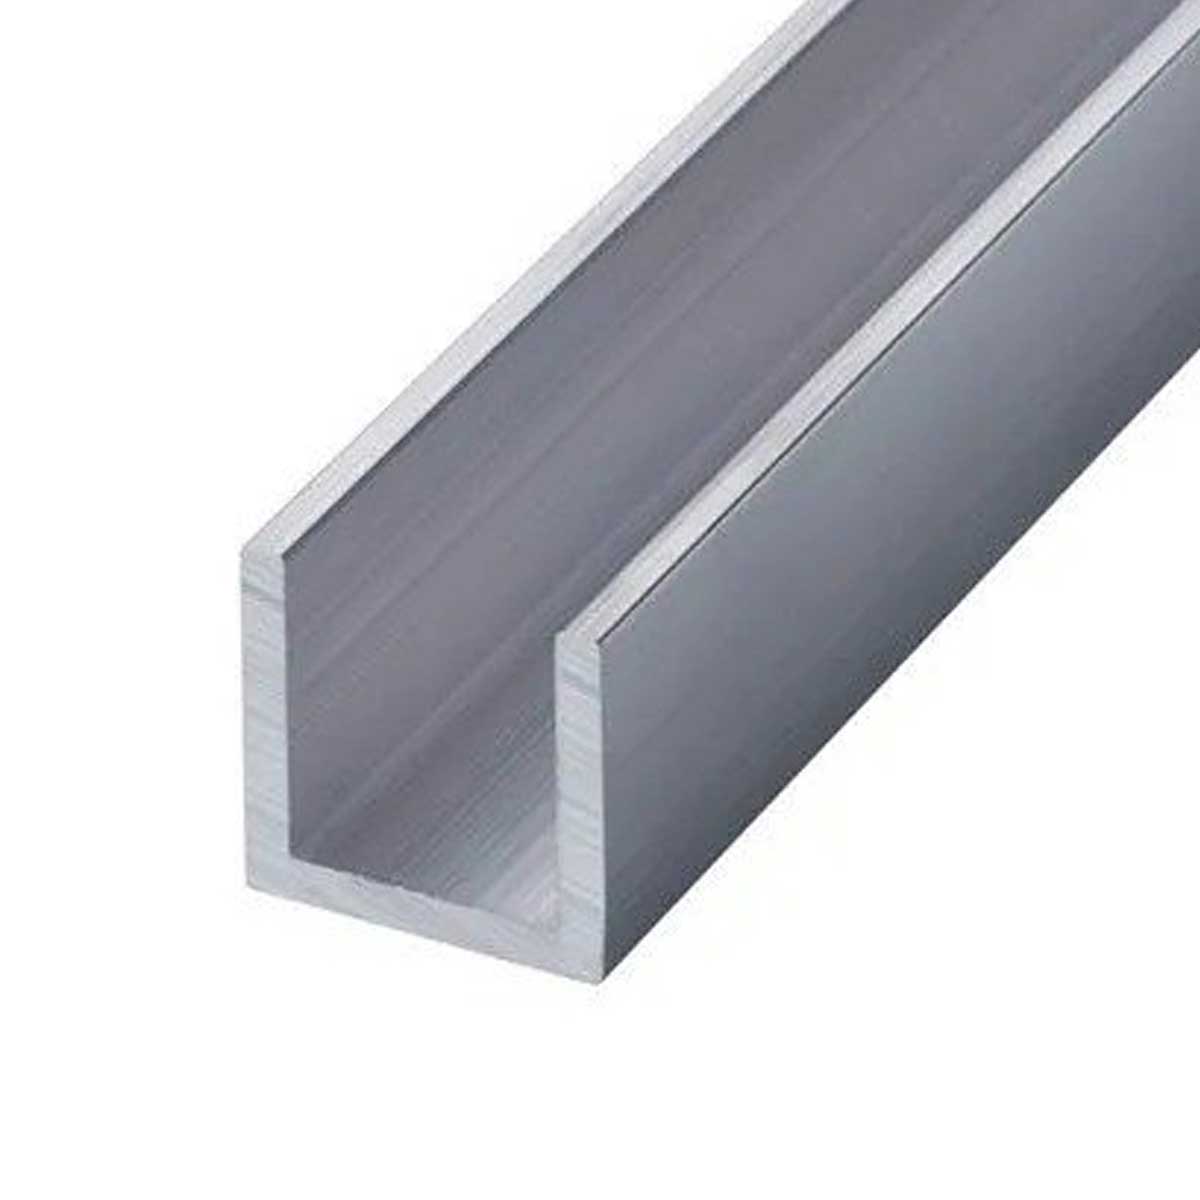 Aluminium C Channel For Construction Manufacturers, Suppliers in Darjeeling